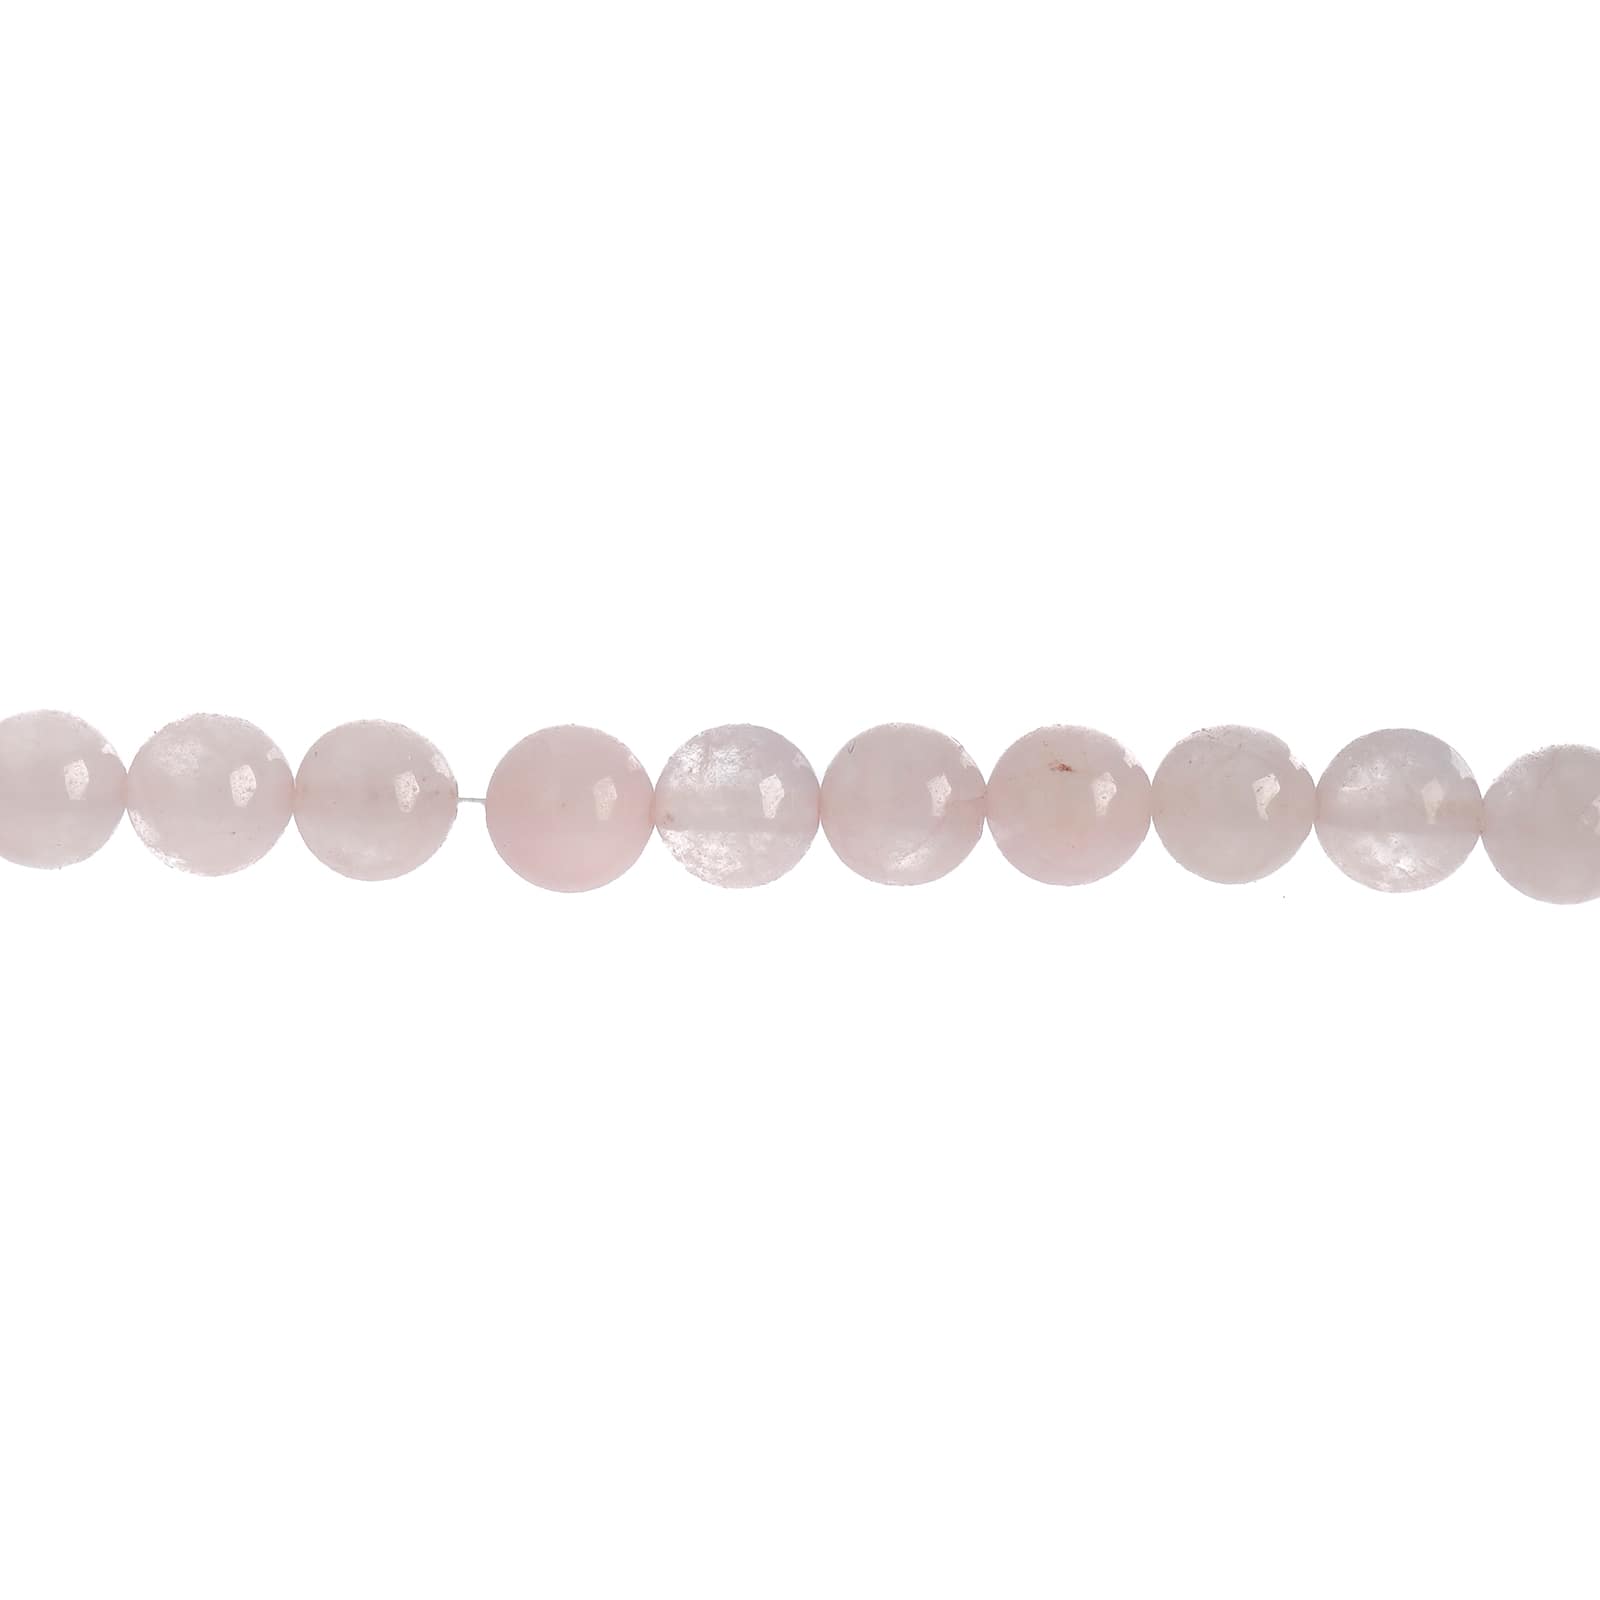 John Bead Earth's Jewels Natural Stone Round Beads, 8mm